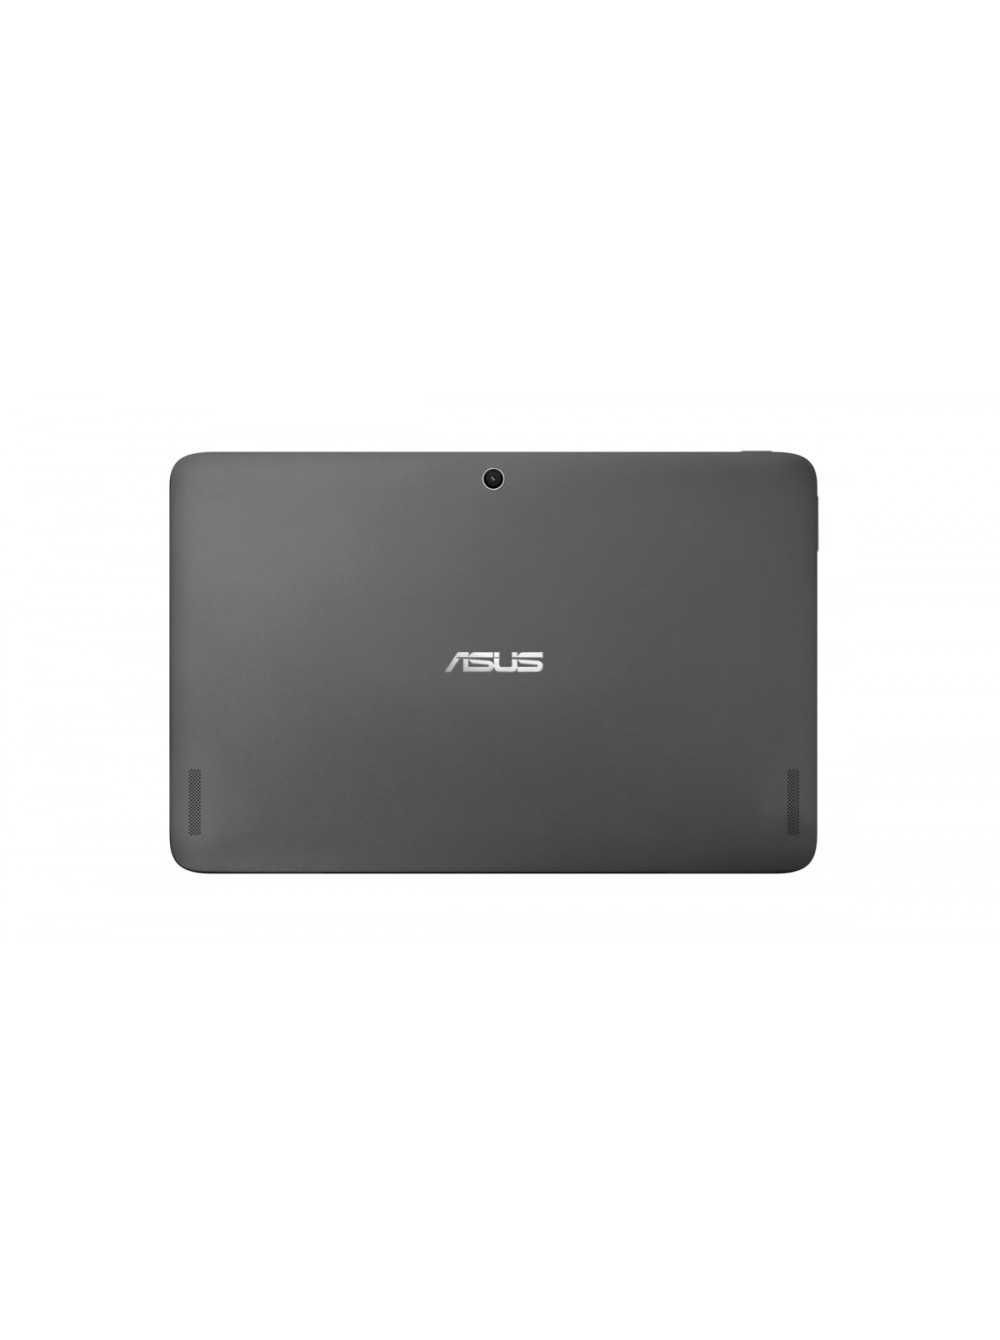 Asus t100/t200 touchscreen not working? here's a solution! - turbofuture